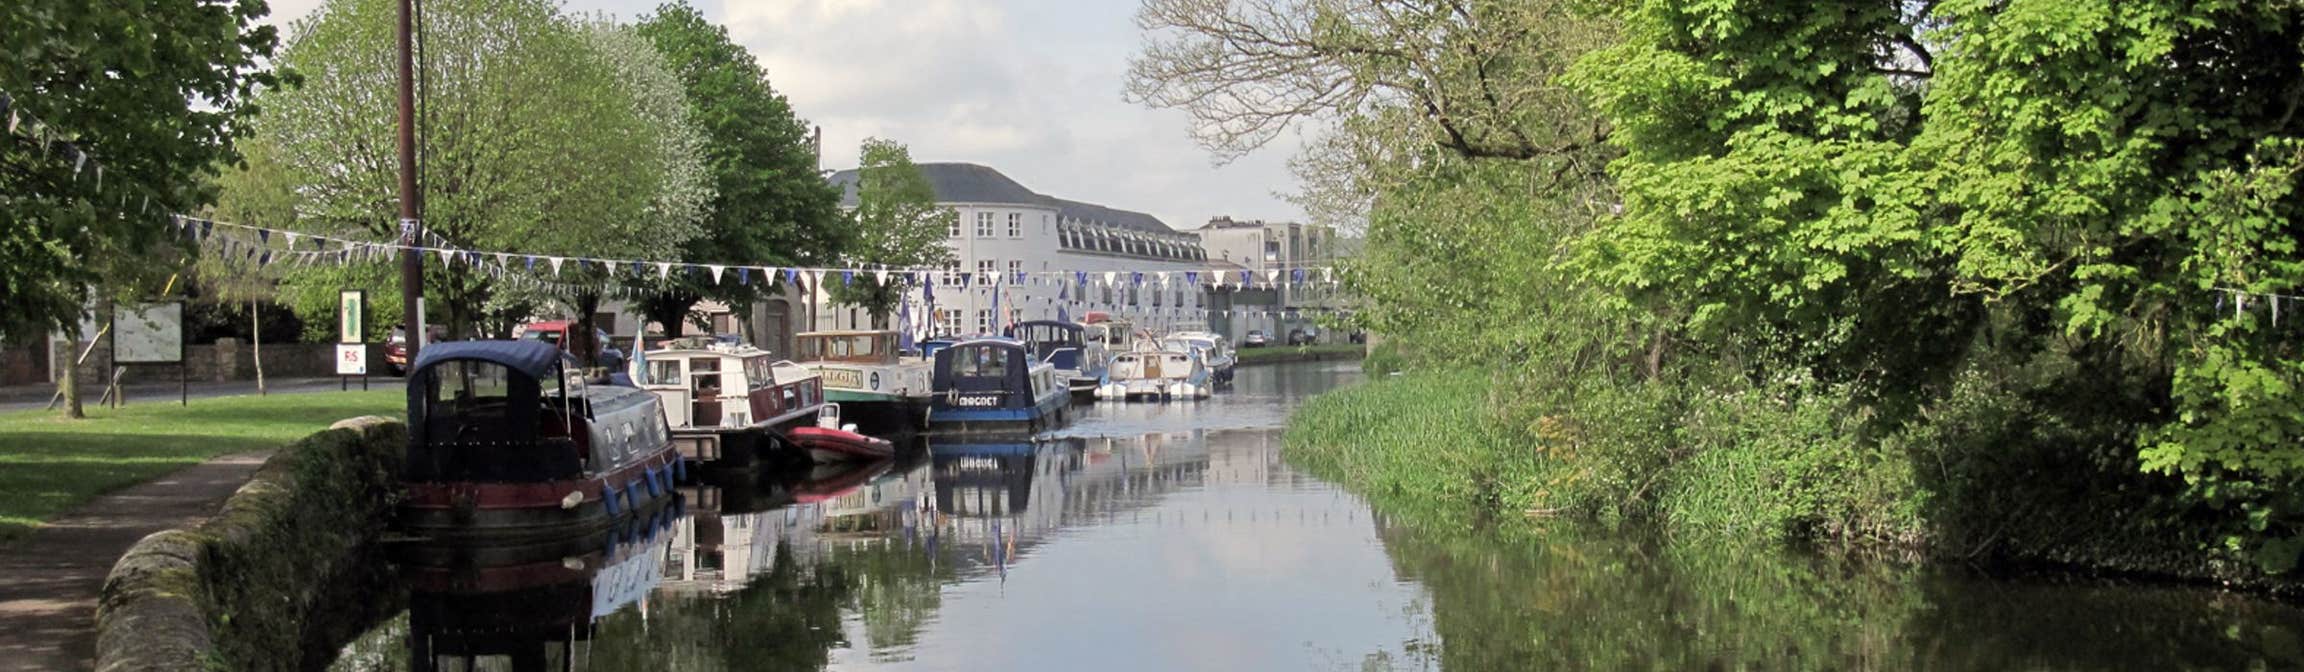 Image of boats on the river in Bagenalstown in County Carlow